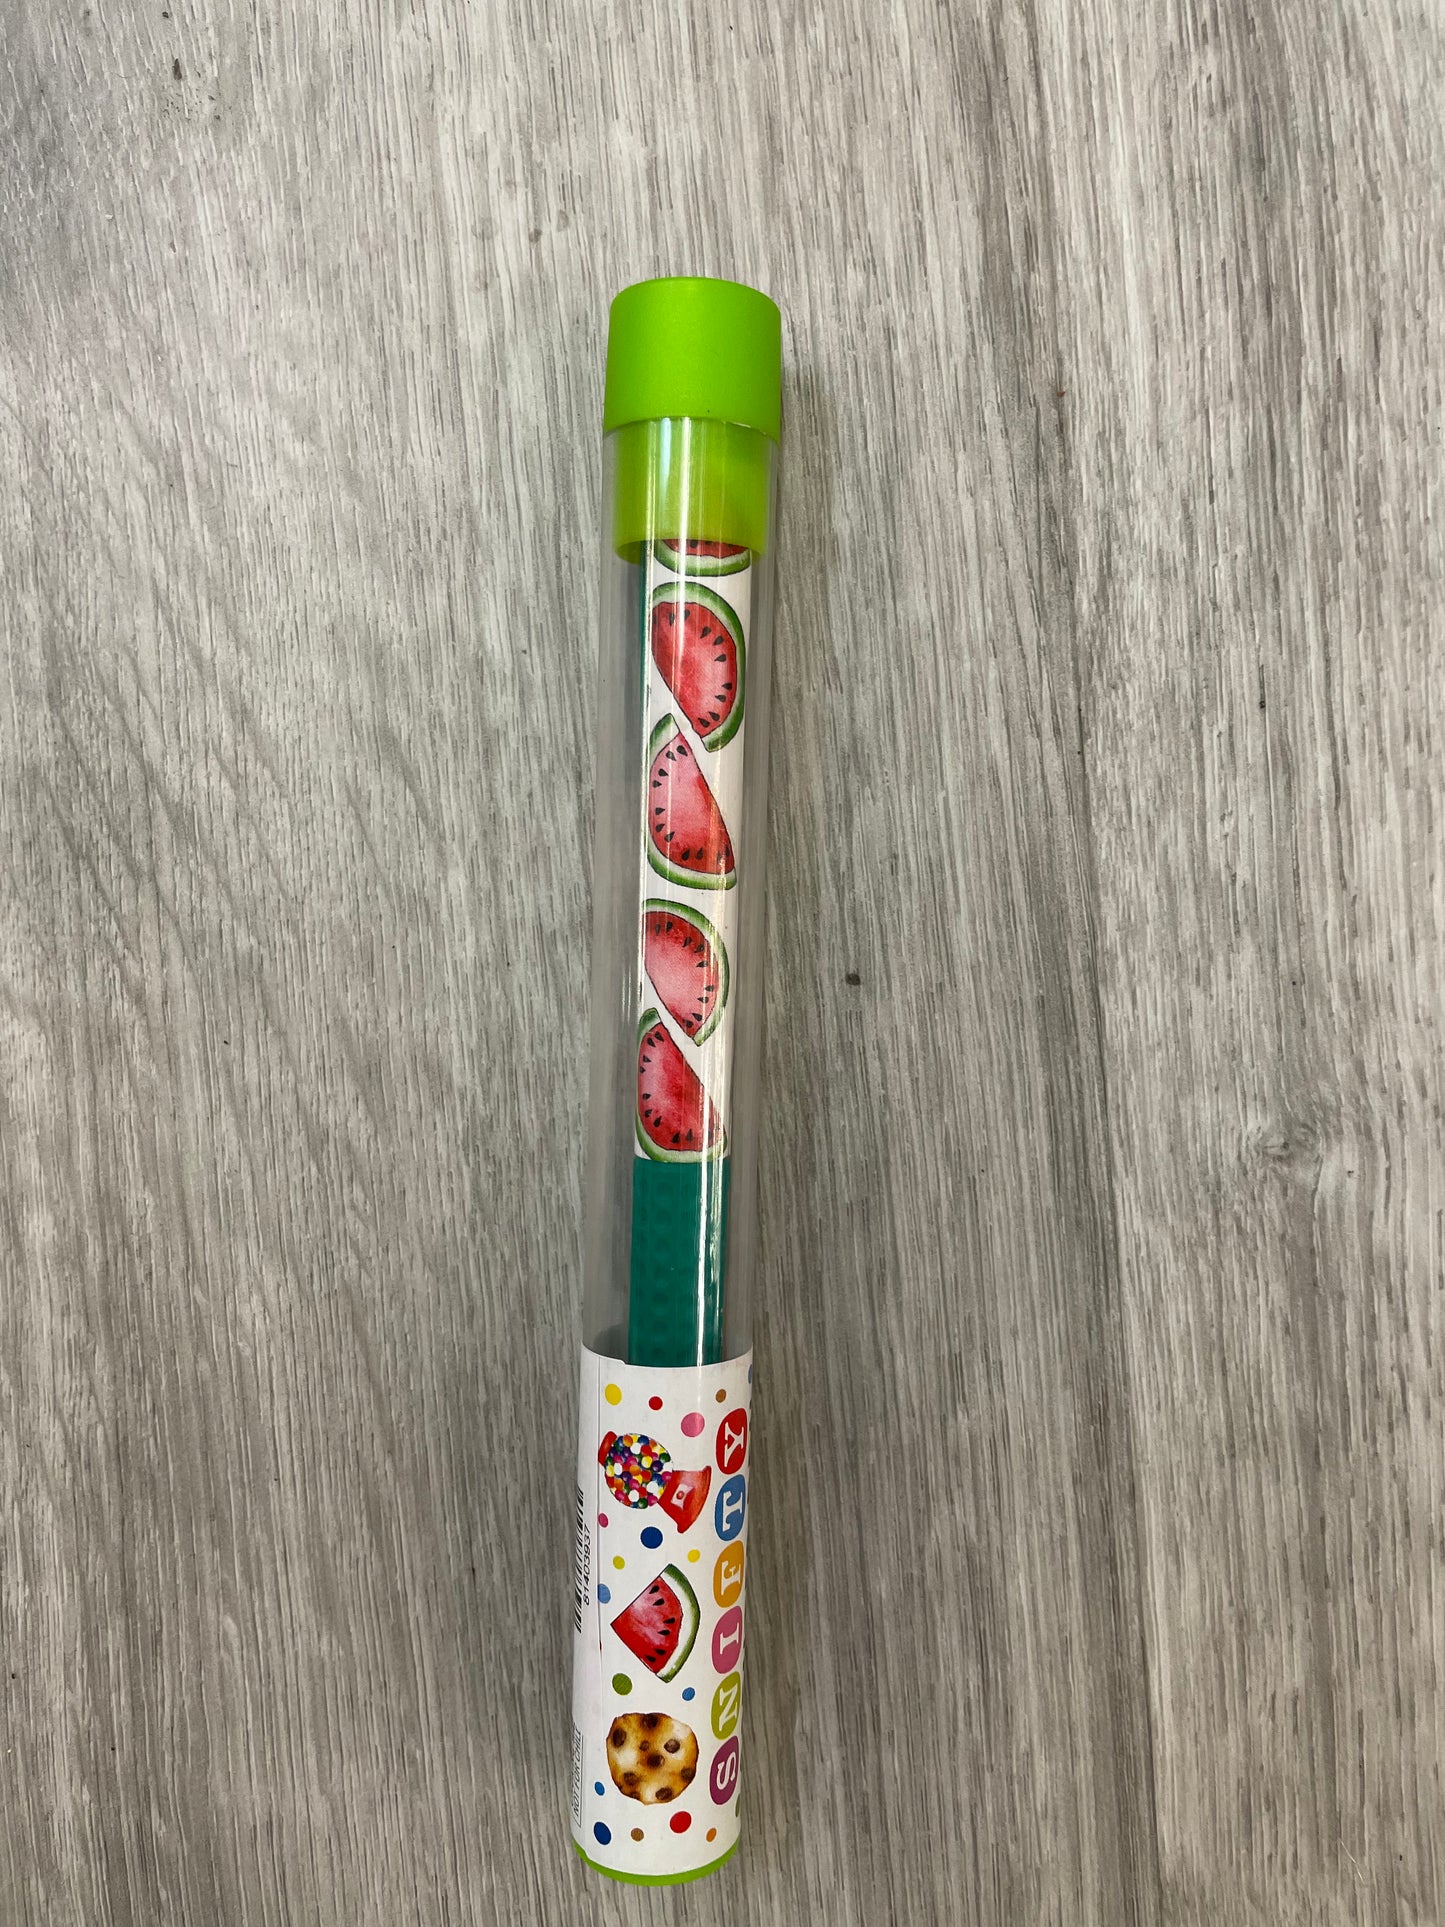 Snifty Pen In A Tube Scented Fruits